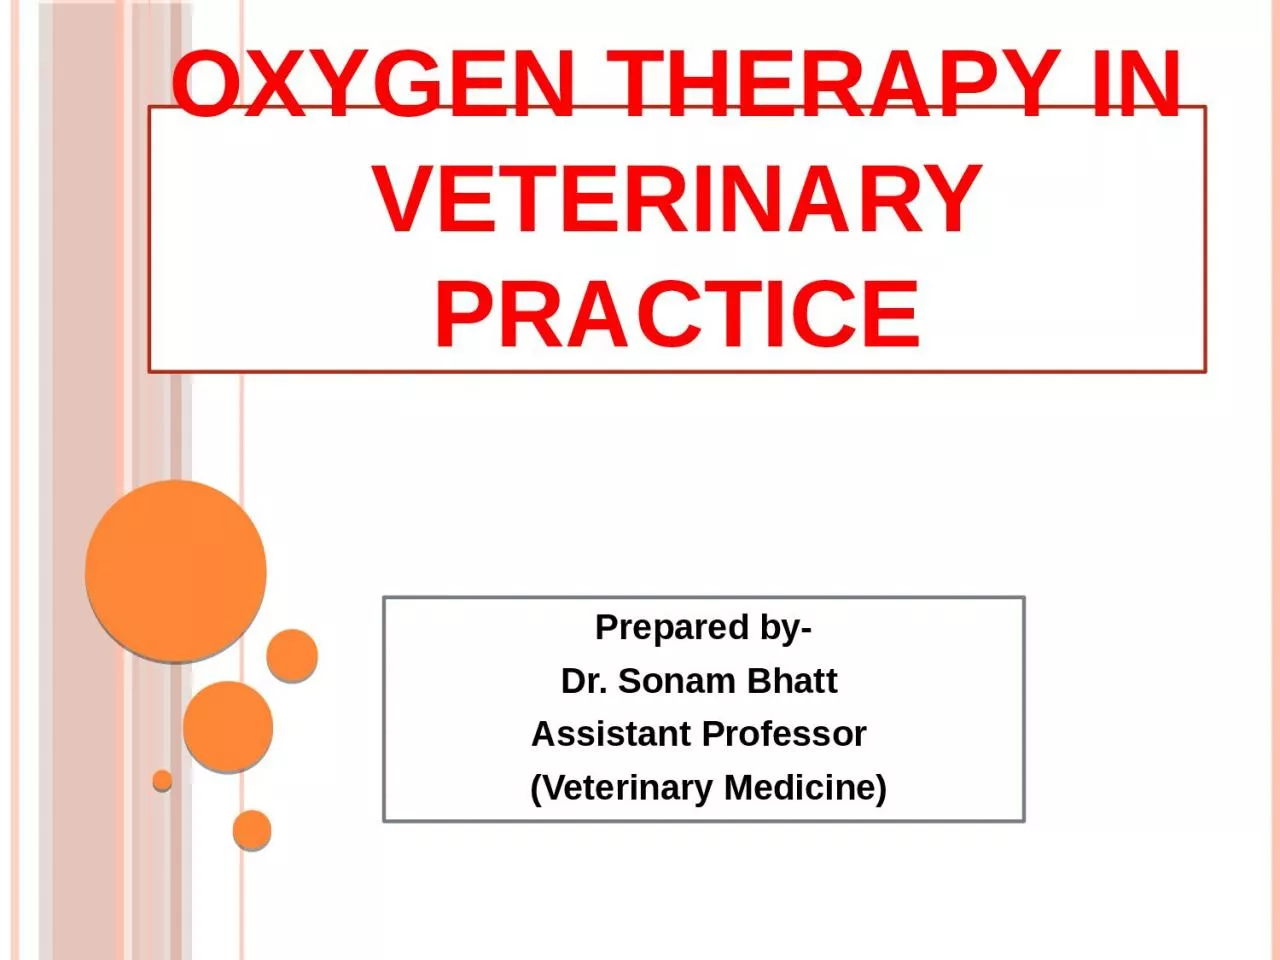 Oxygen Therapy in Veterinary Practice